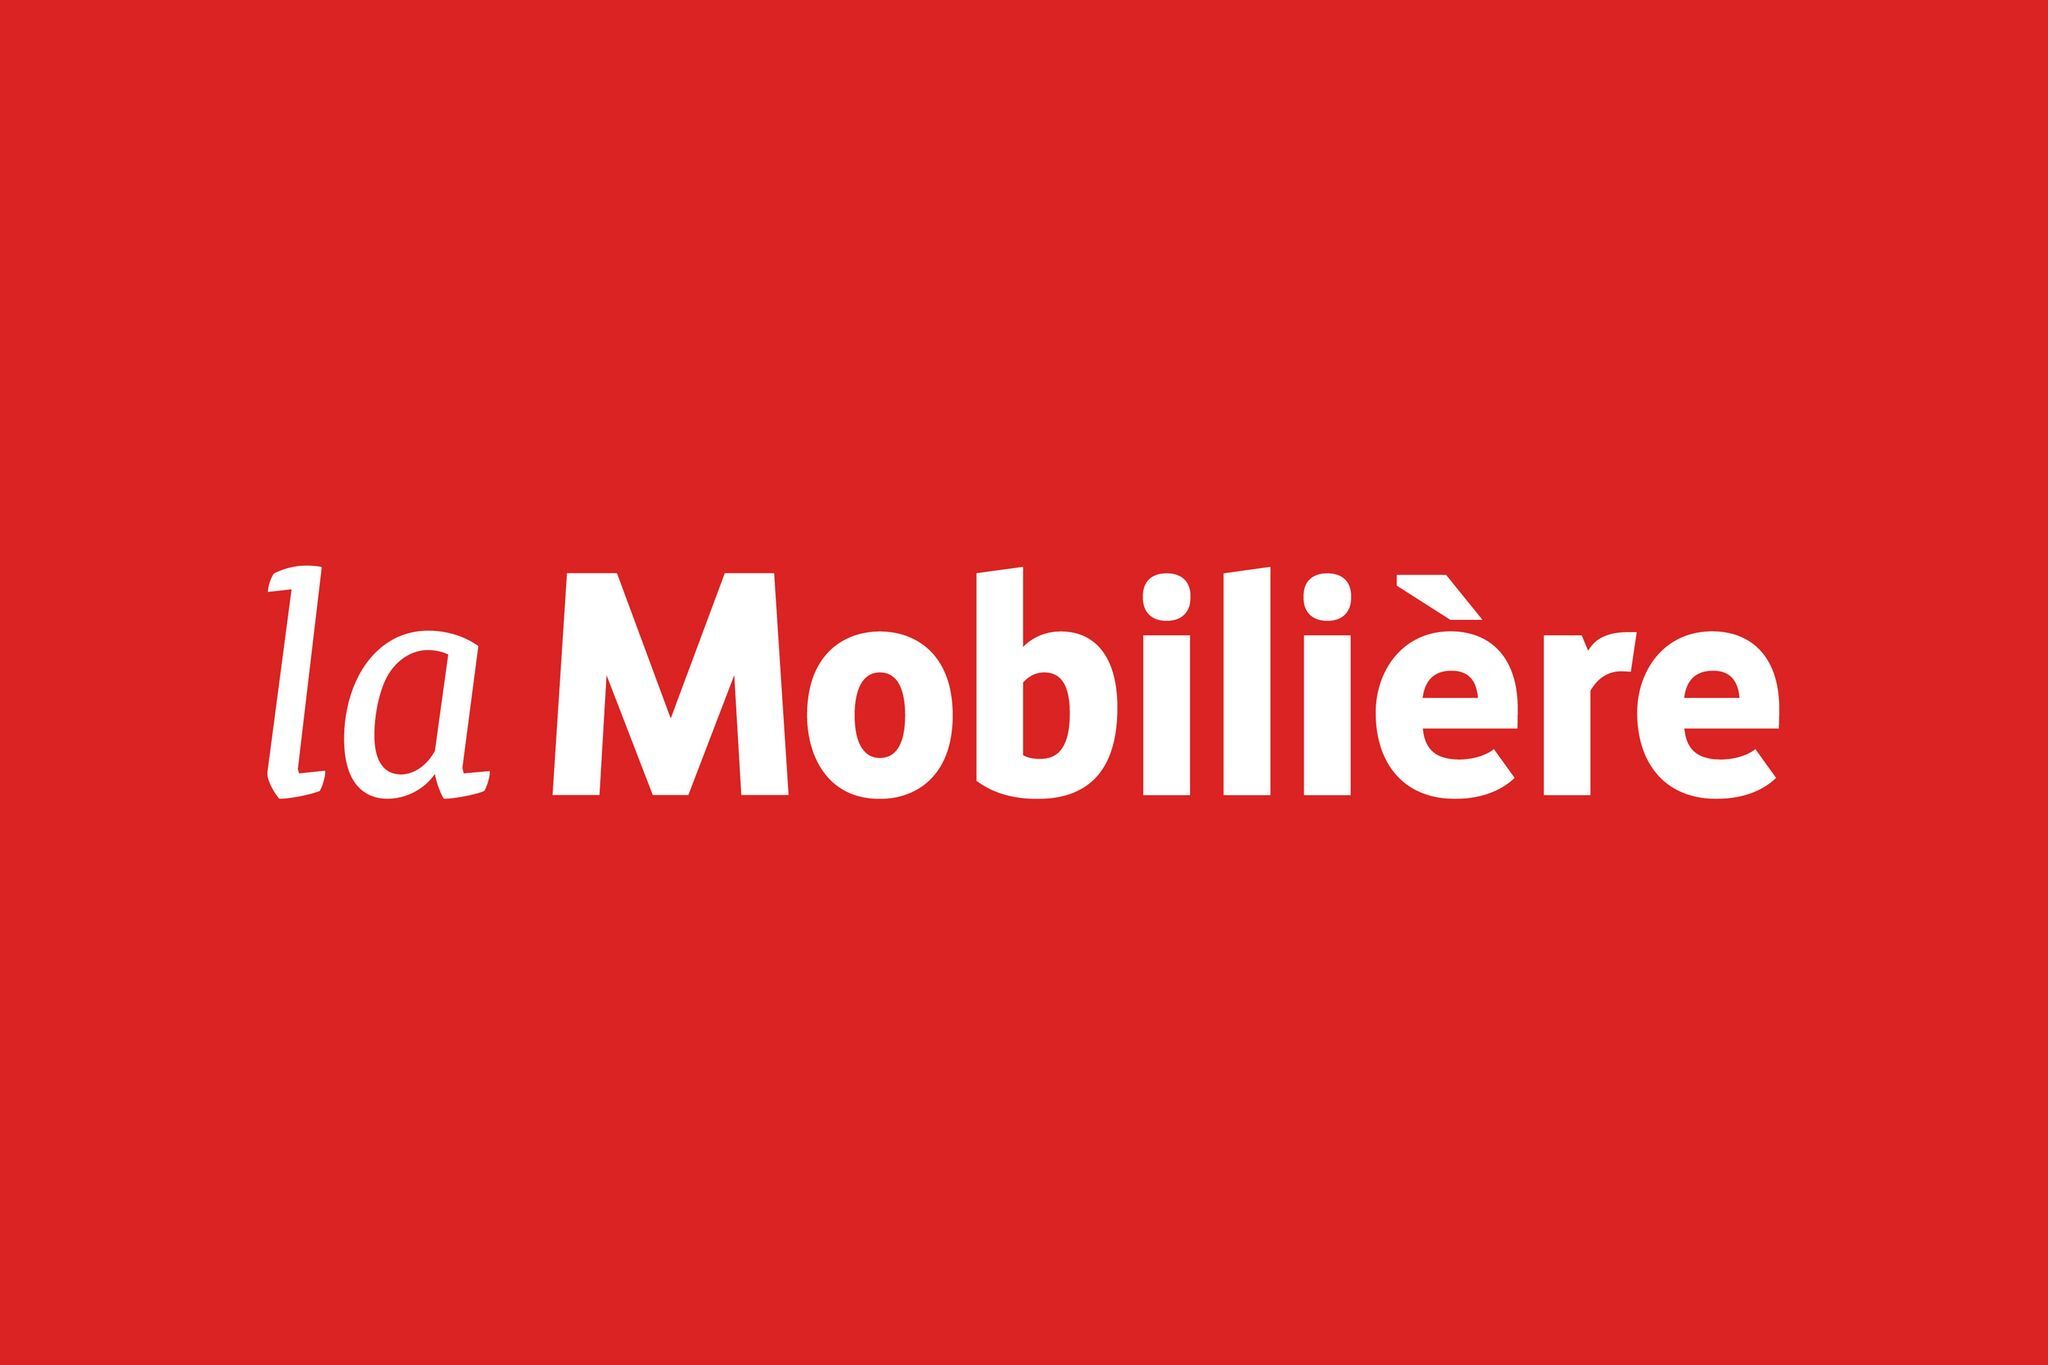 Mobiliere